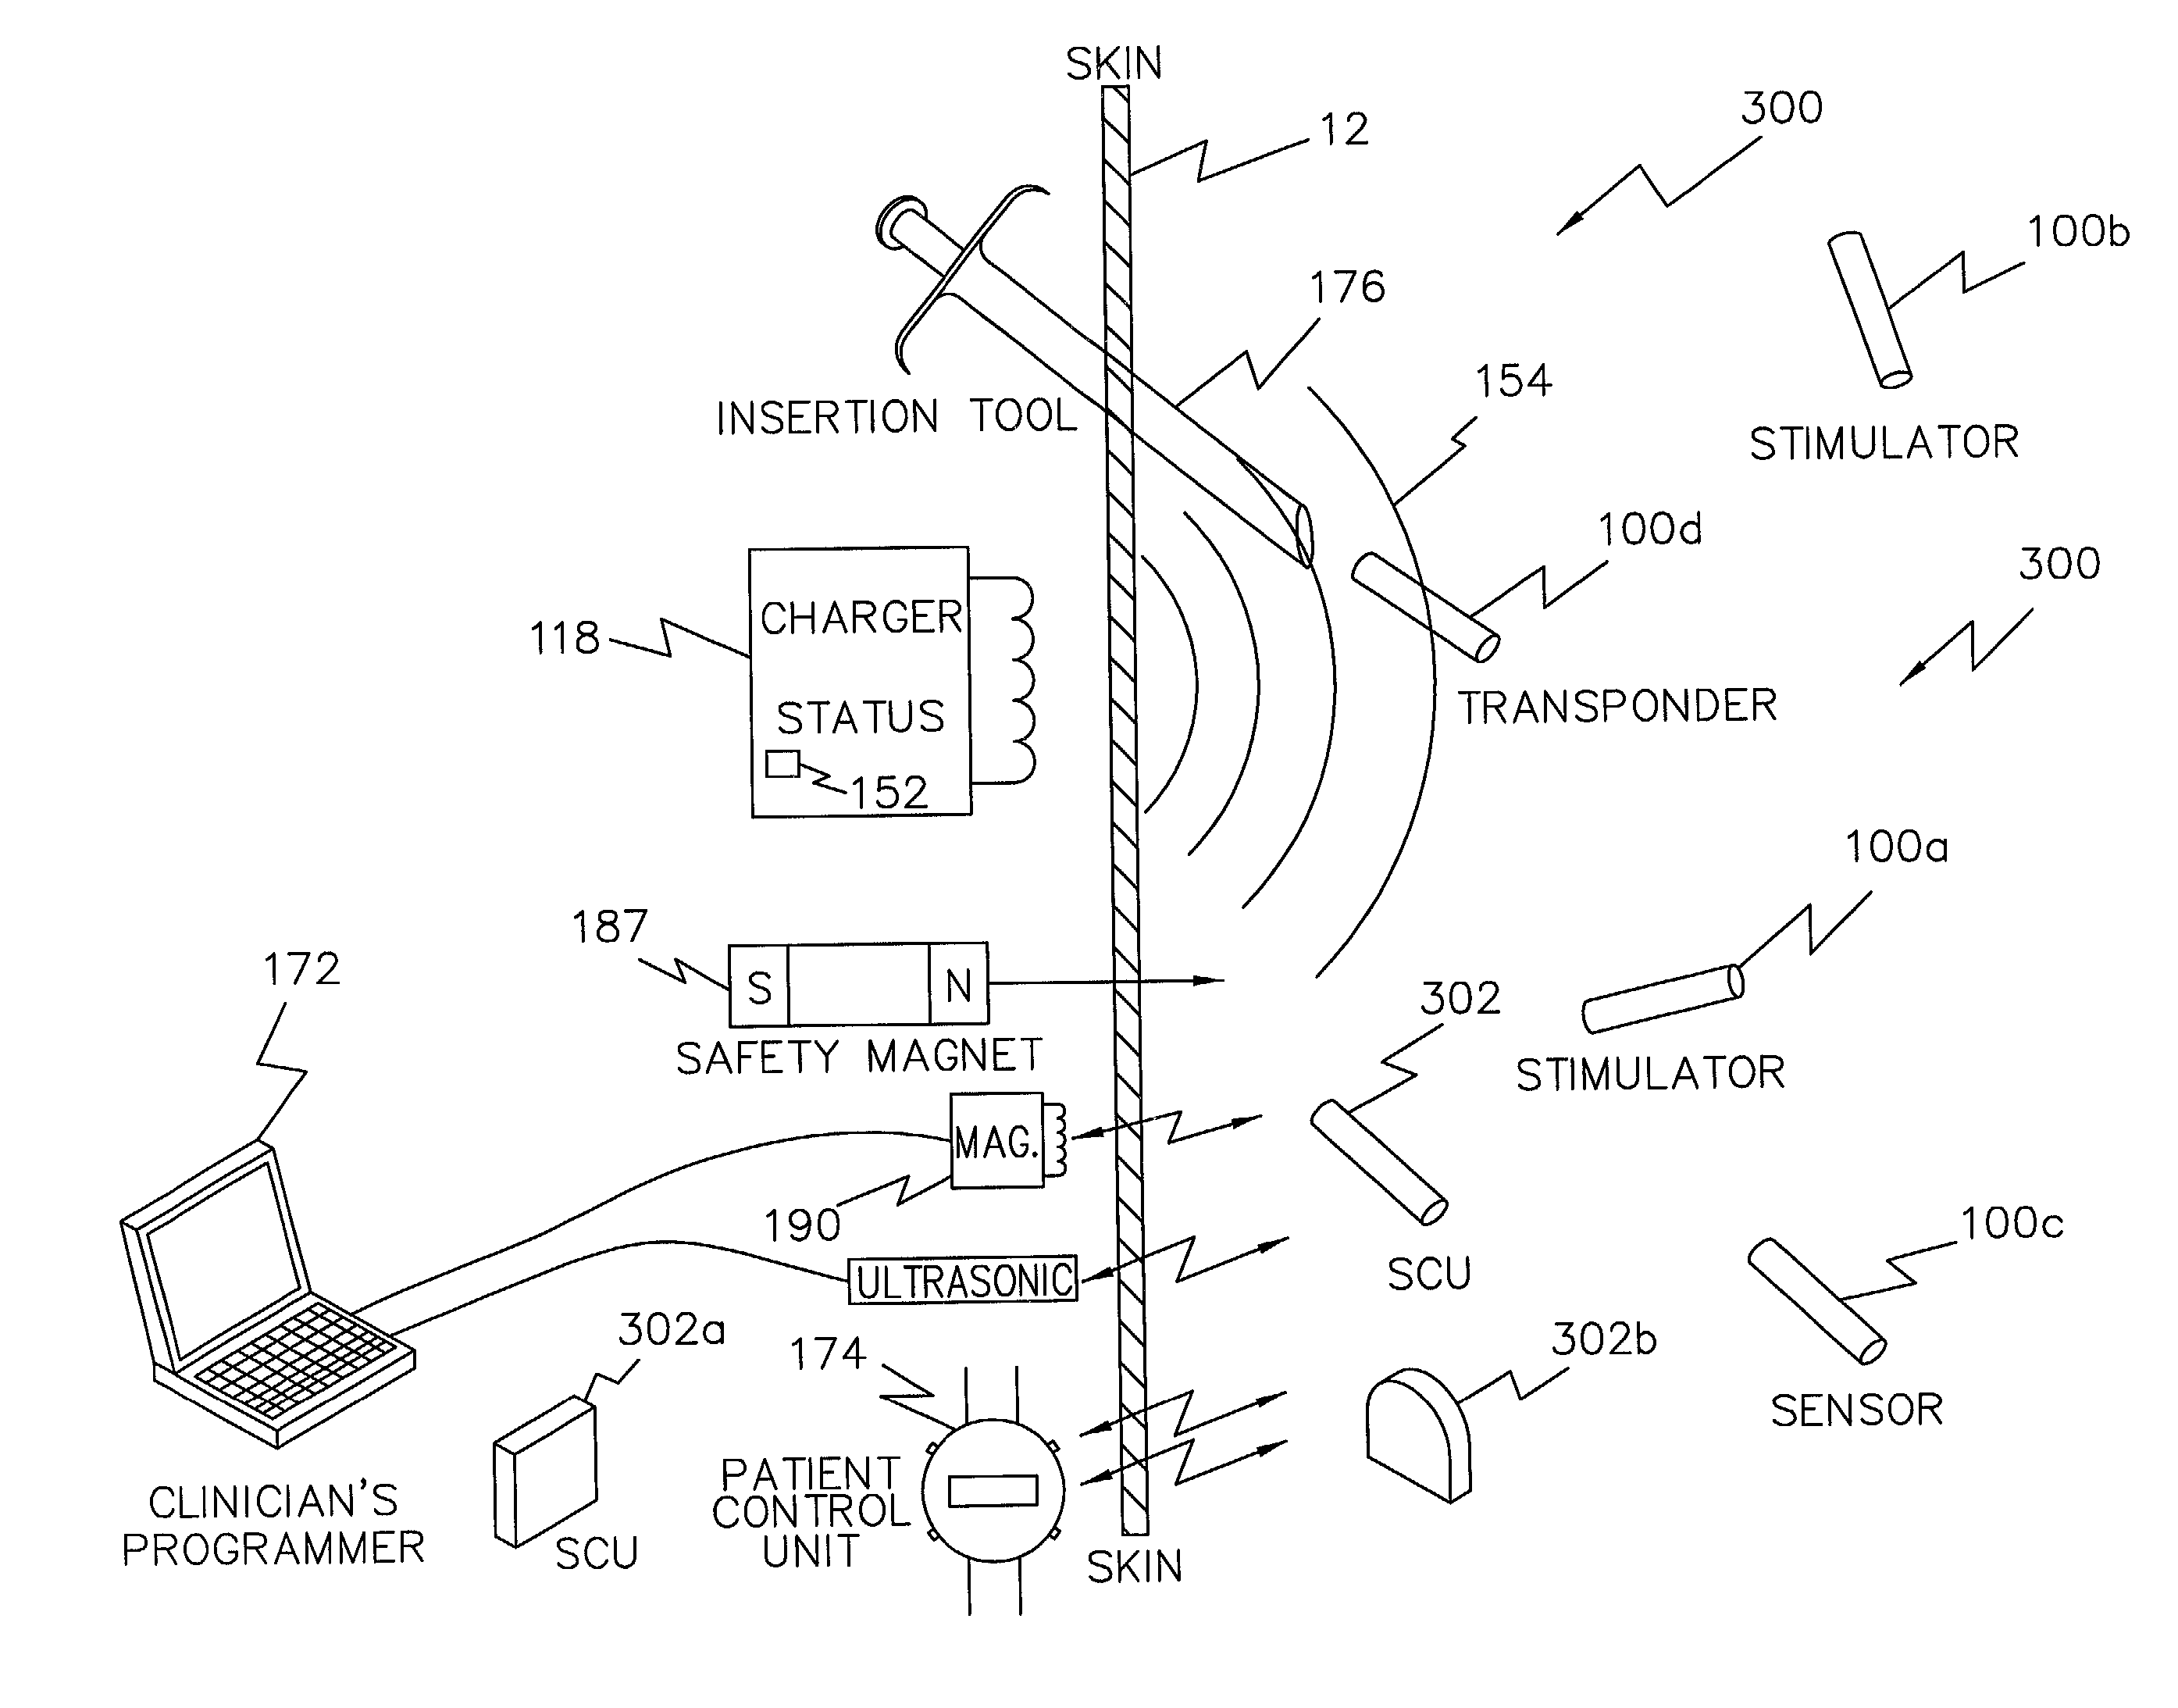 Pulsed magnetic control system for interlocking functions of battery powered living tissue stimulators